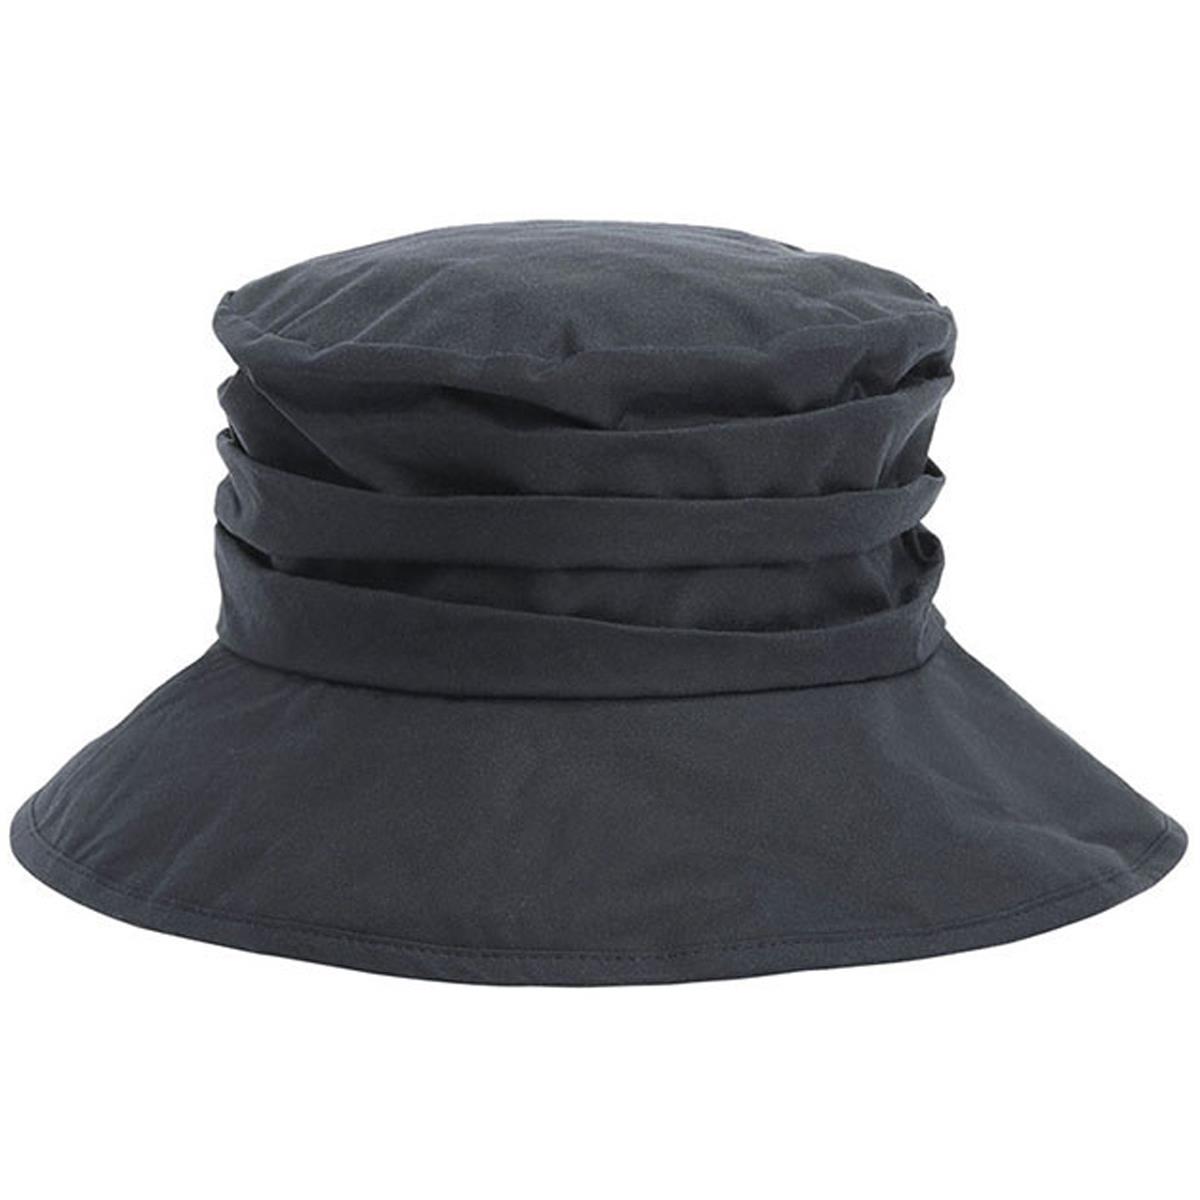 Is it possible to fold the Barbour Women's Wax Sports Hat into a pocket or bag?